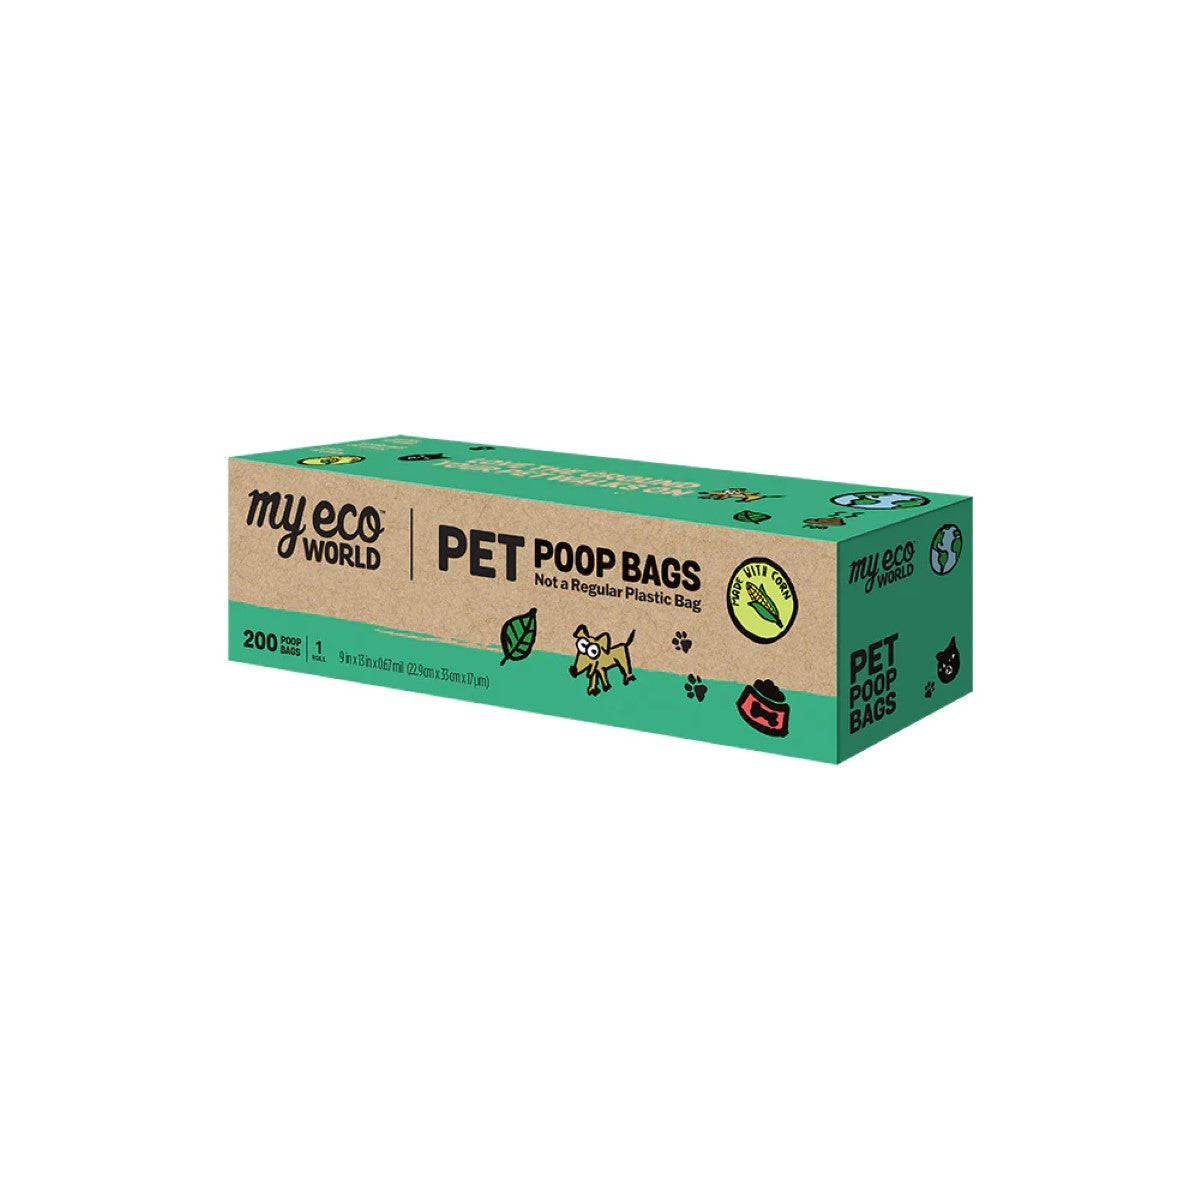 MyEcoWorld® Pet Poop Bags Tissue - 1-Roll / 200-Count